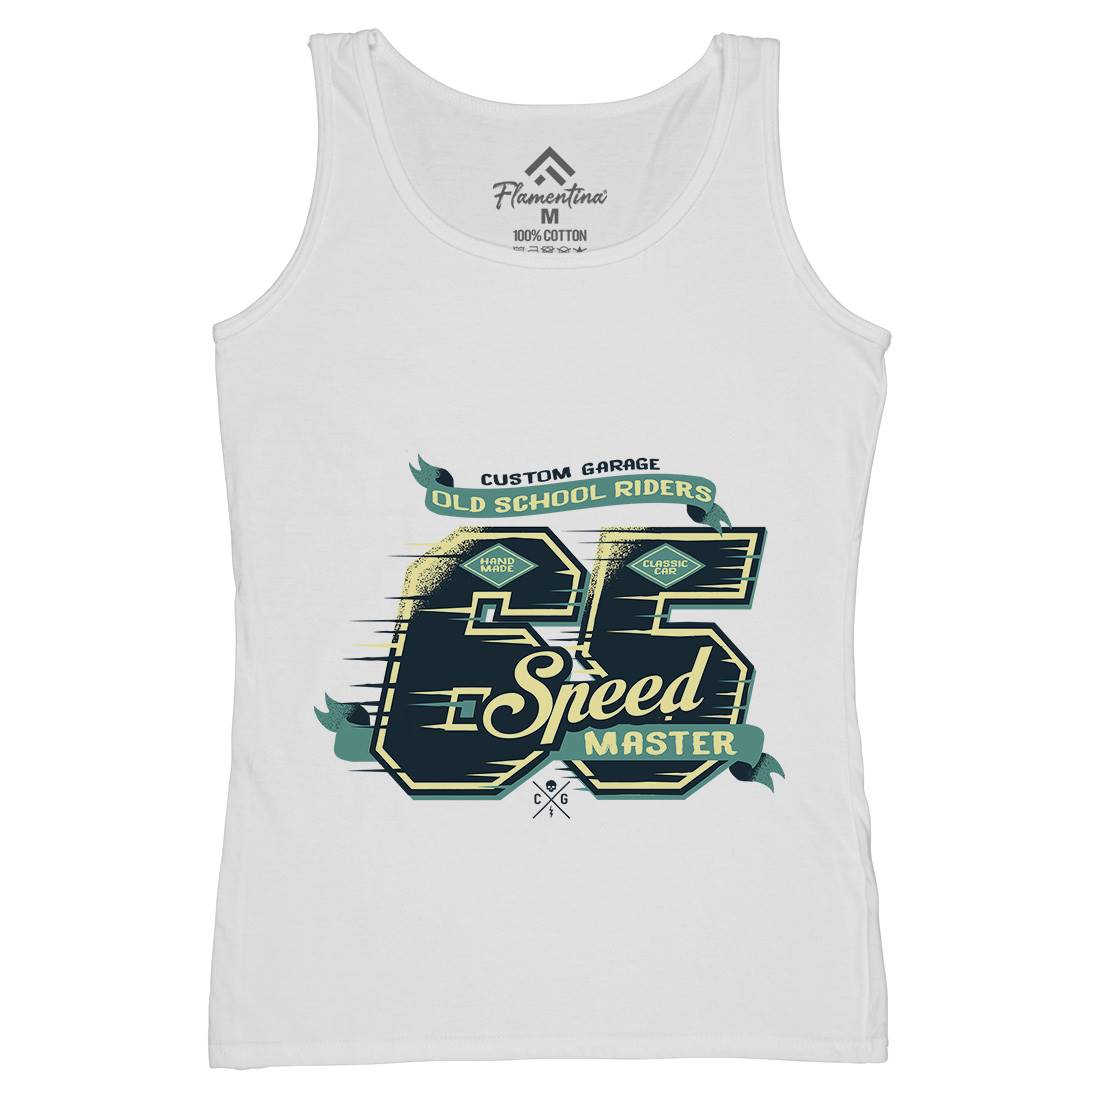 65 Speed Womens Organic Tank Top Vest Motorcycles A982